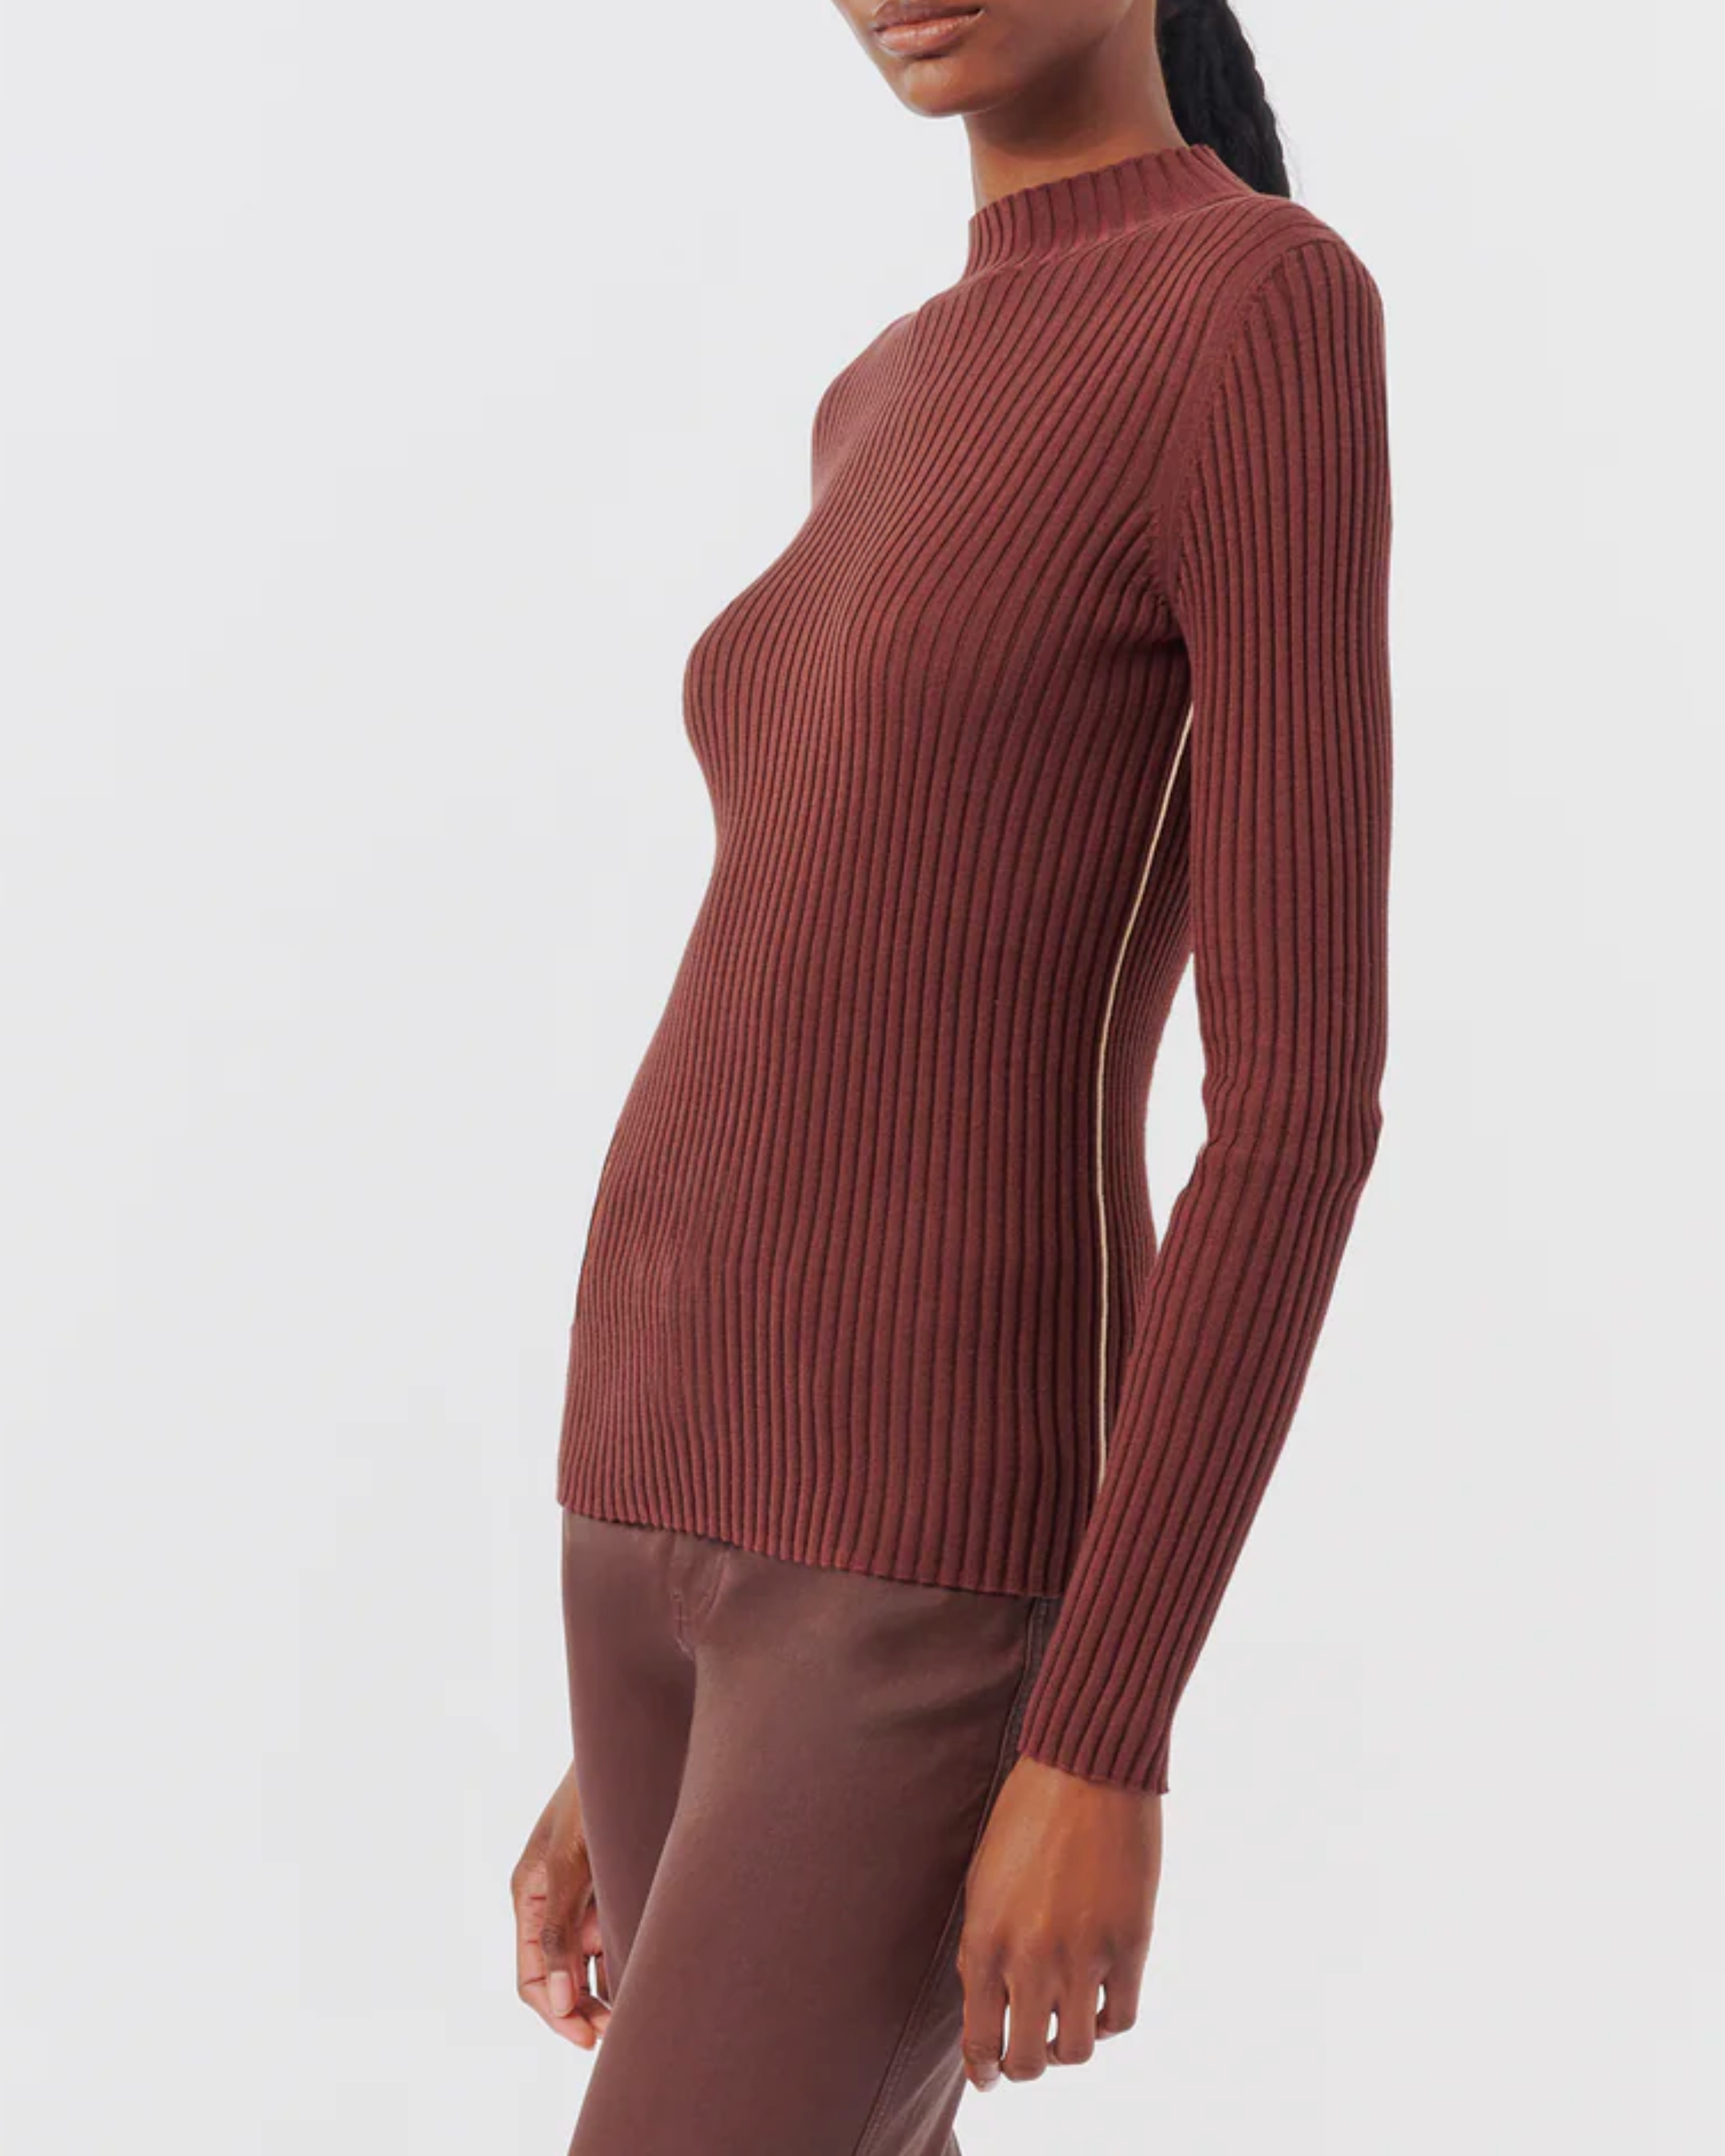 ATM Silk Cotton Mock Neck Sweater in Chocolate